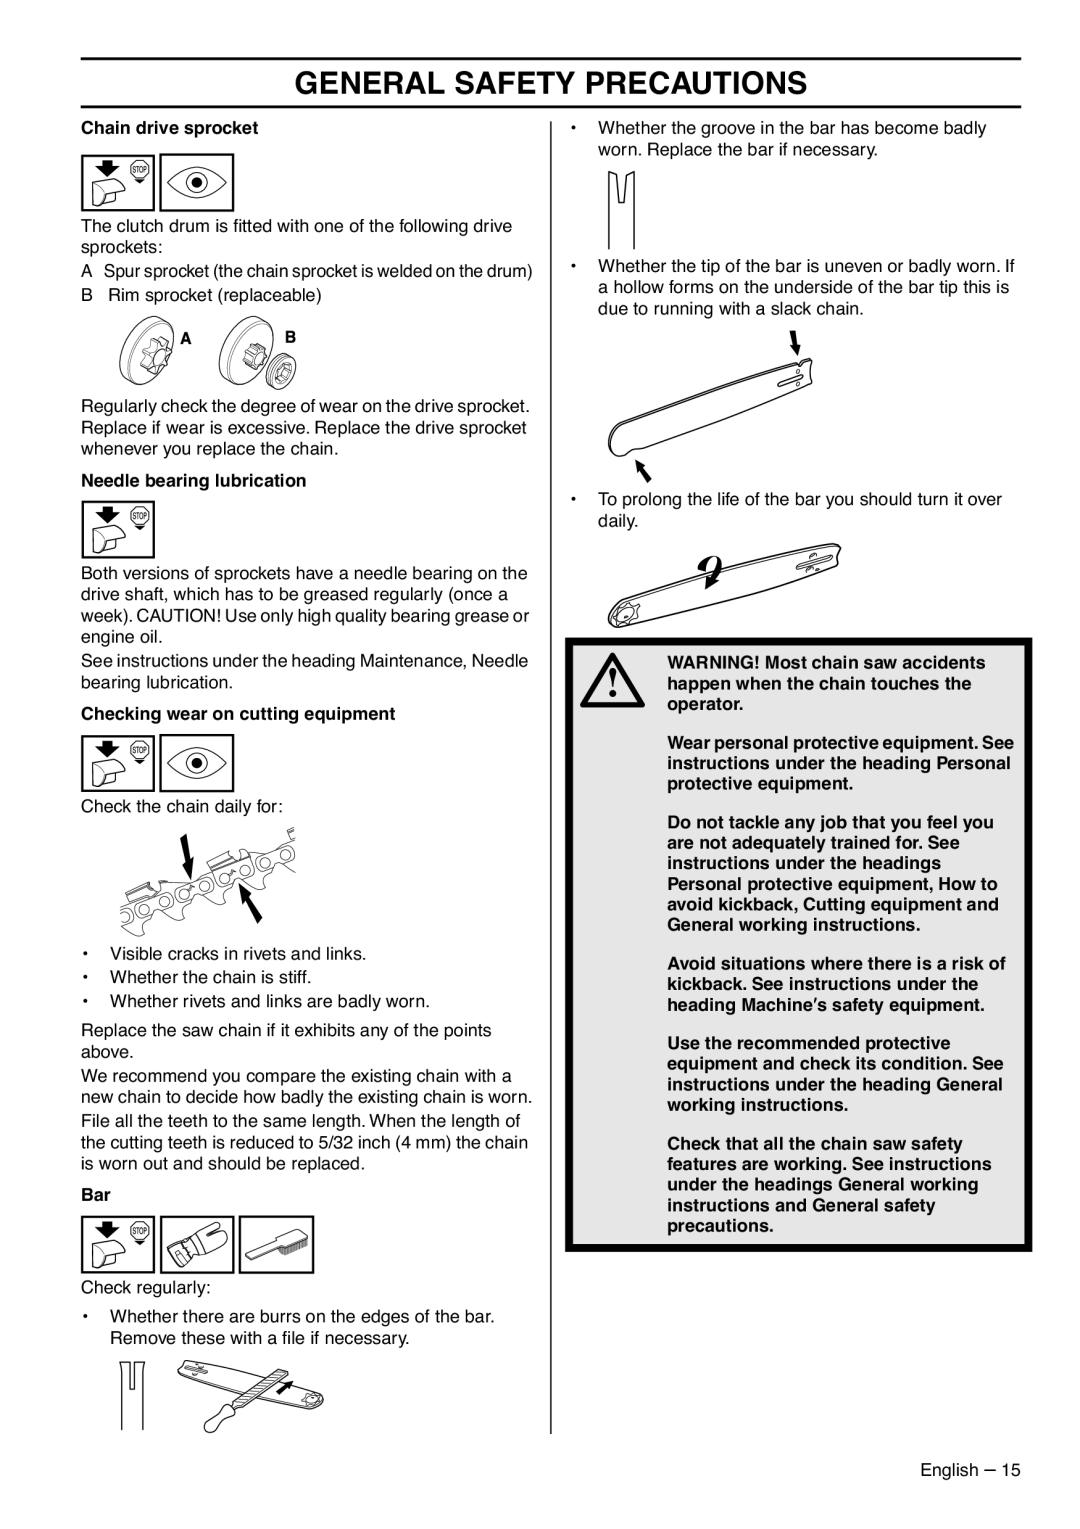 RedMax GZ7000 manual General Safety Precautions 